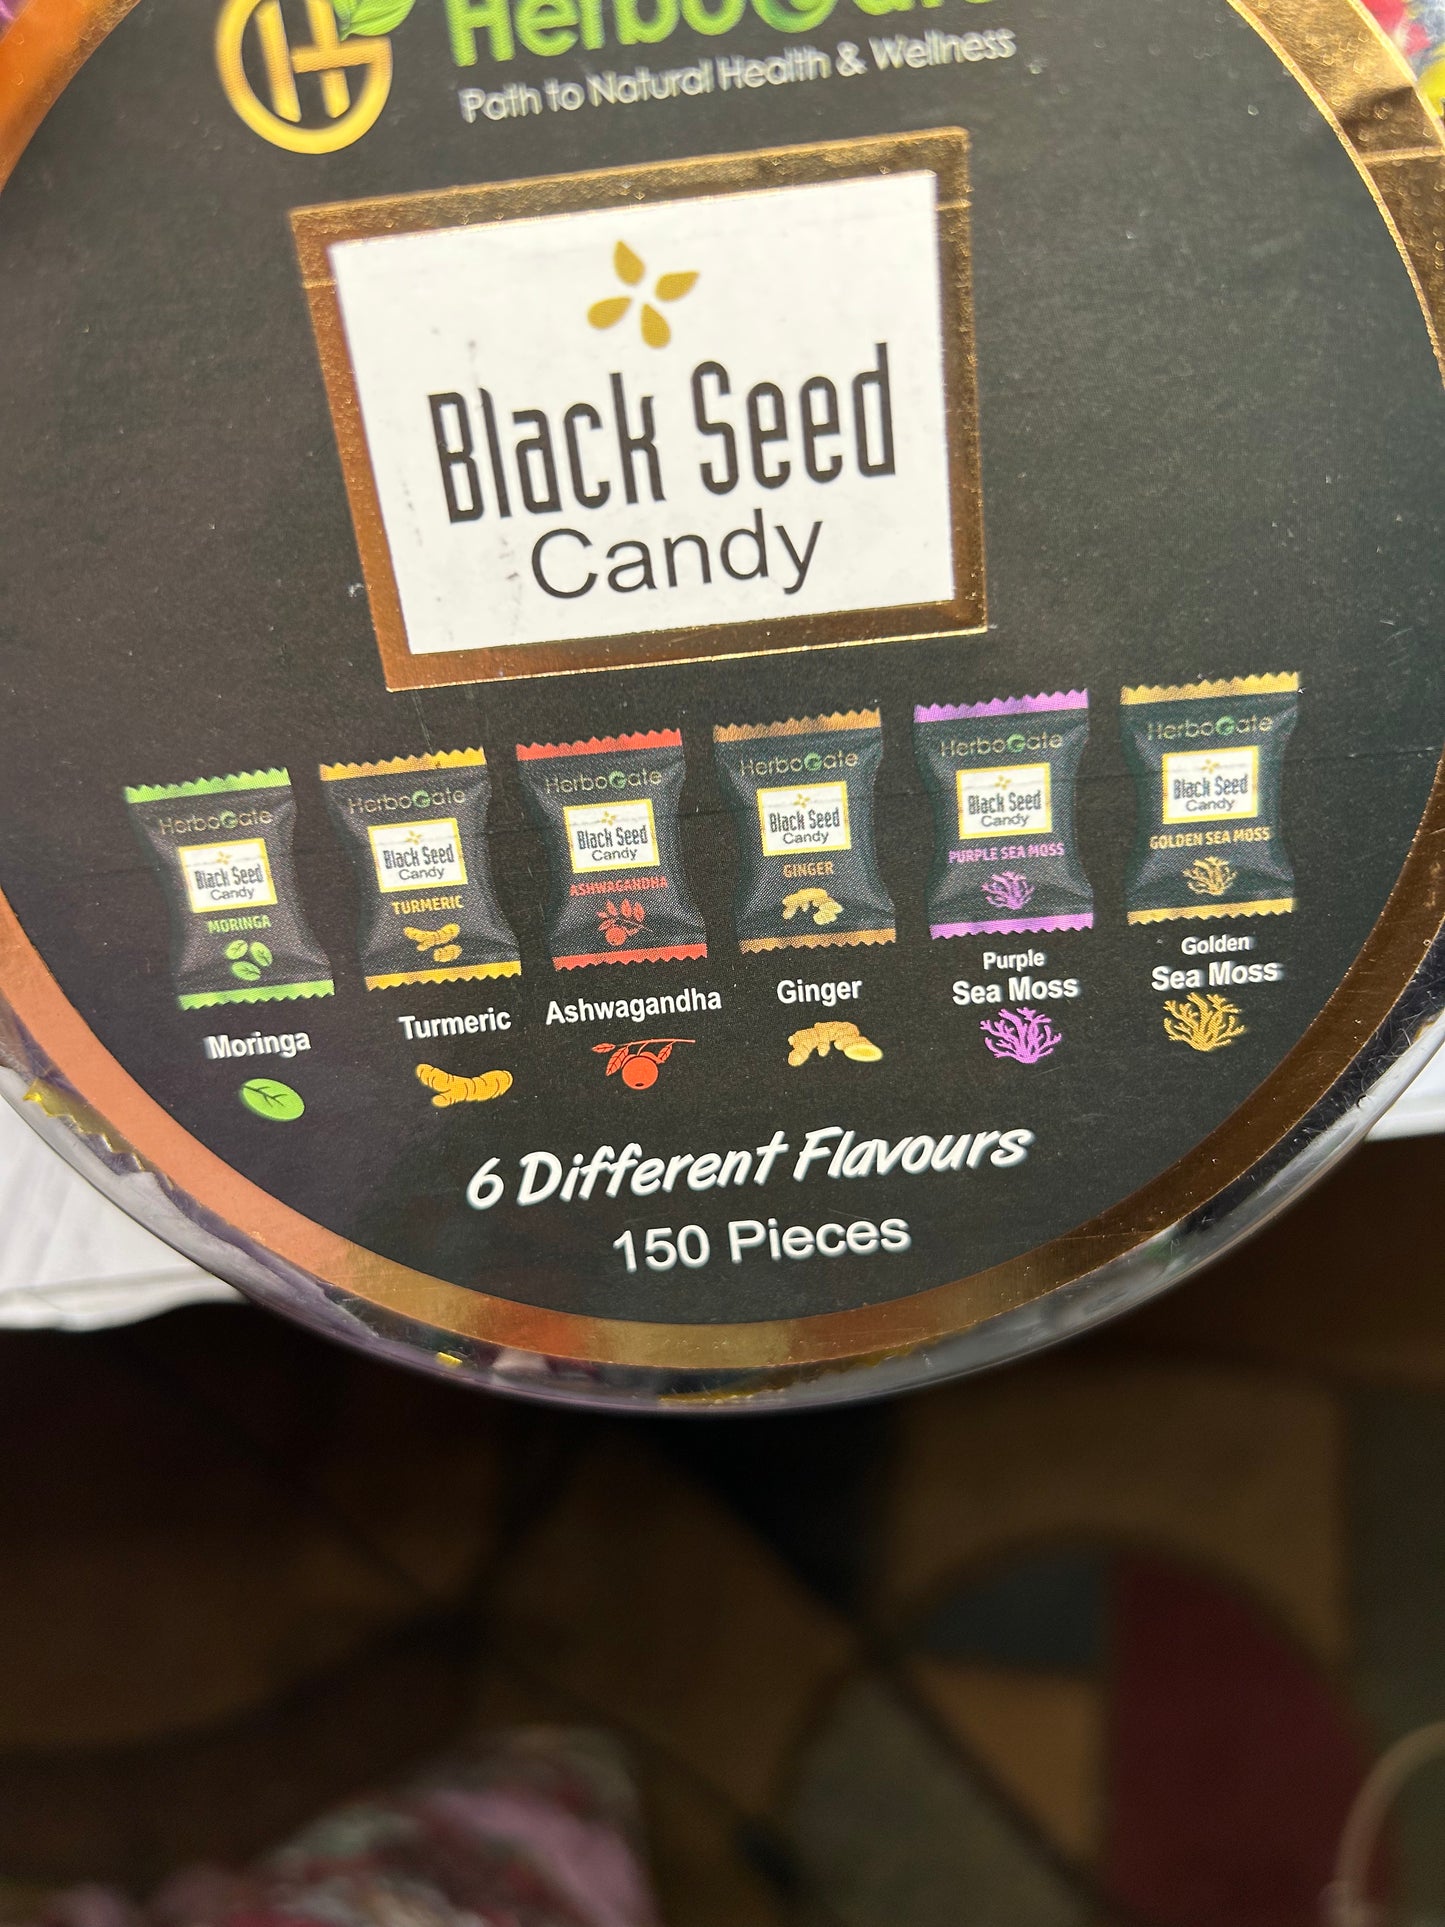 Black Seed Candy